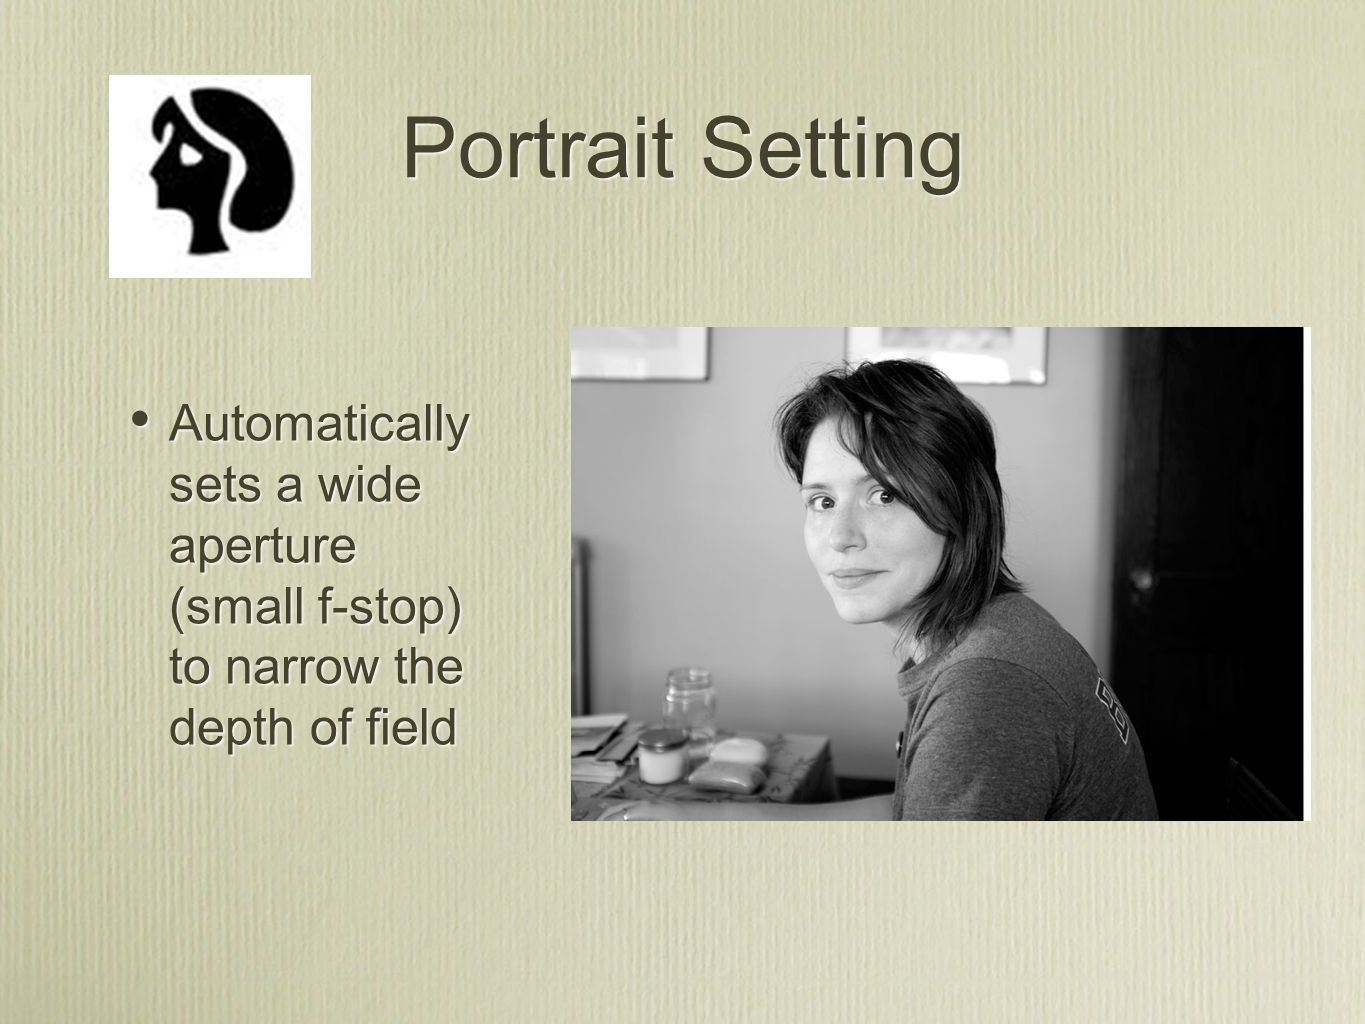 Portrait Setting Automatically sets a wide aperture (small f-stop) to narrow the depth of field